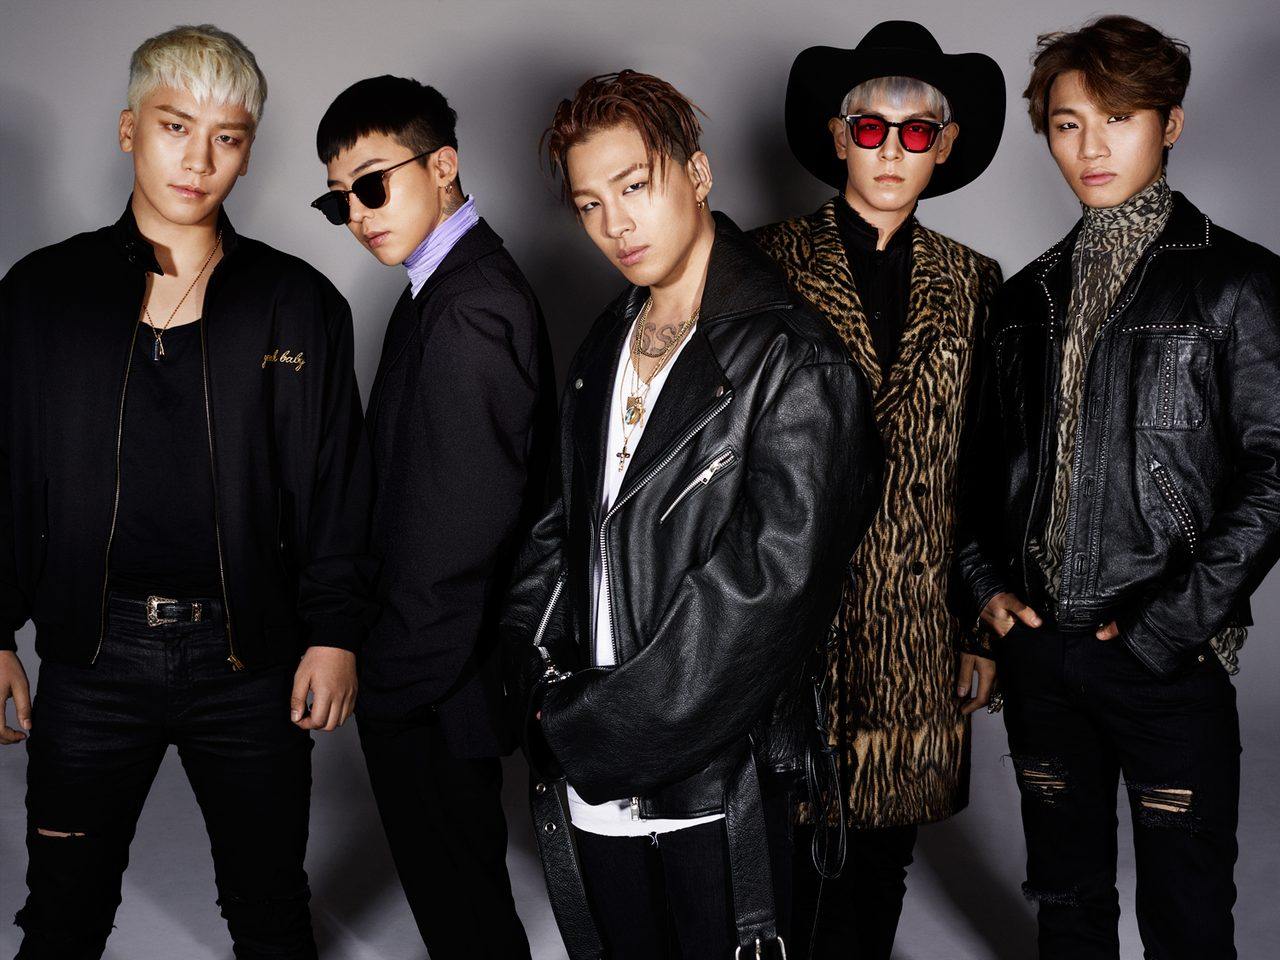 BigBang at the height of their fame, with now-disgraced Seungri (left). Photo: Handout